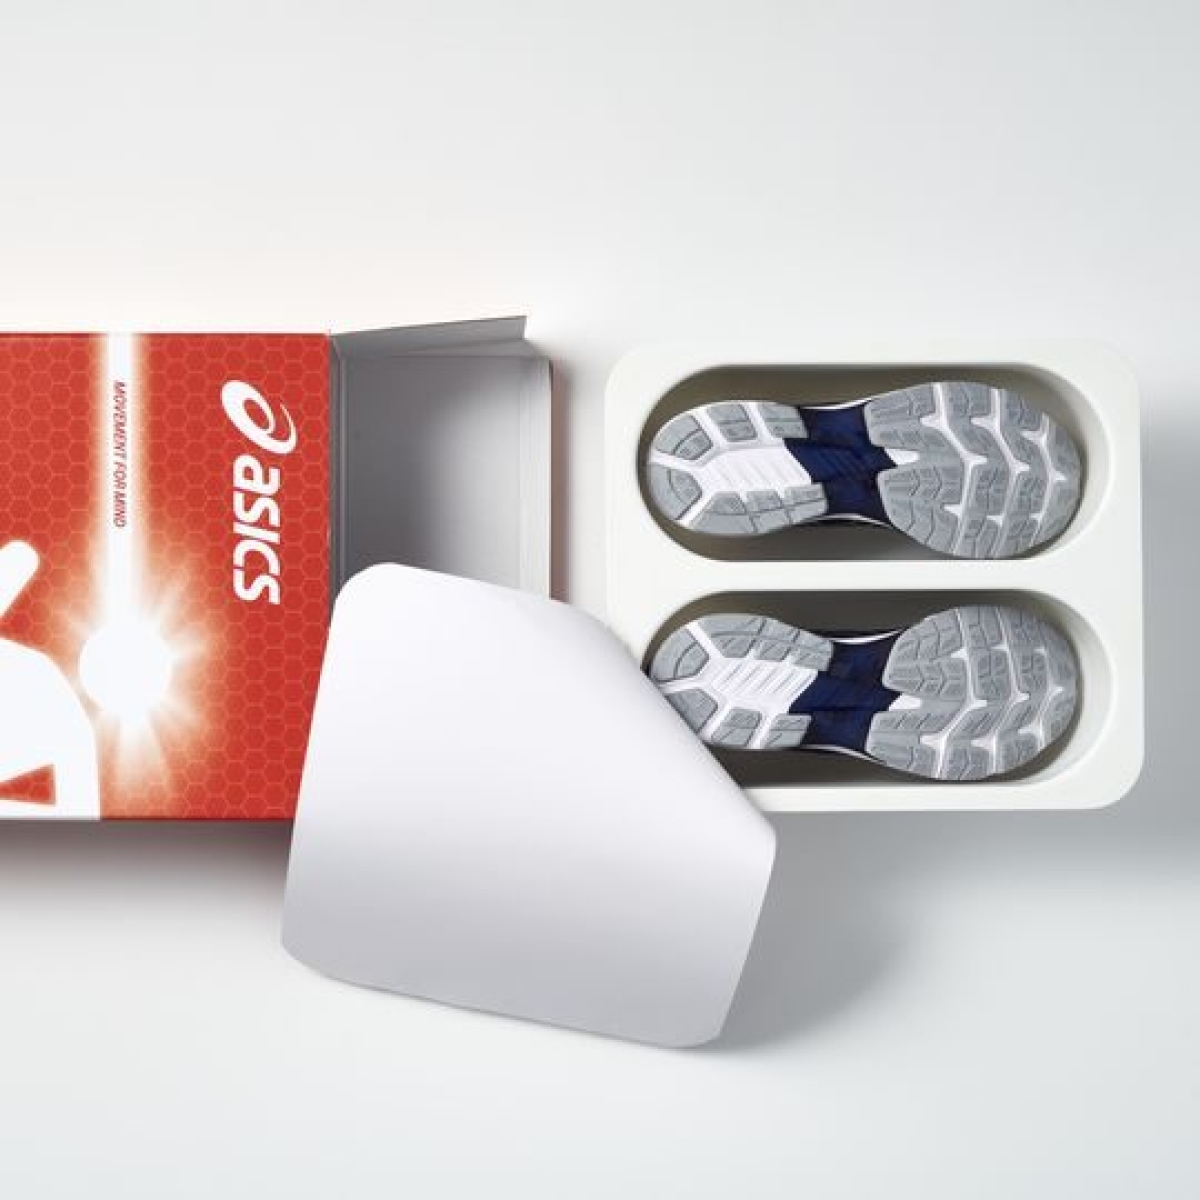 Sound mind, sound body: The history and the idea behind ASICS